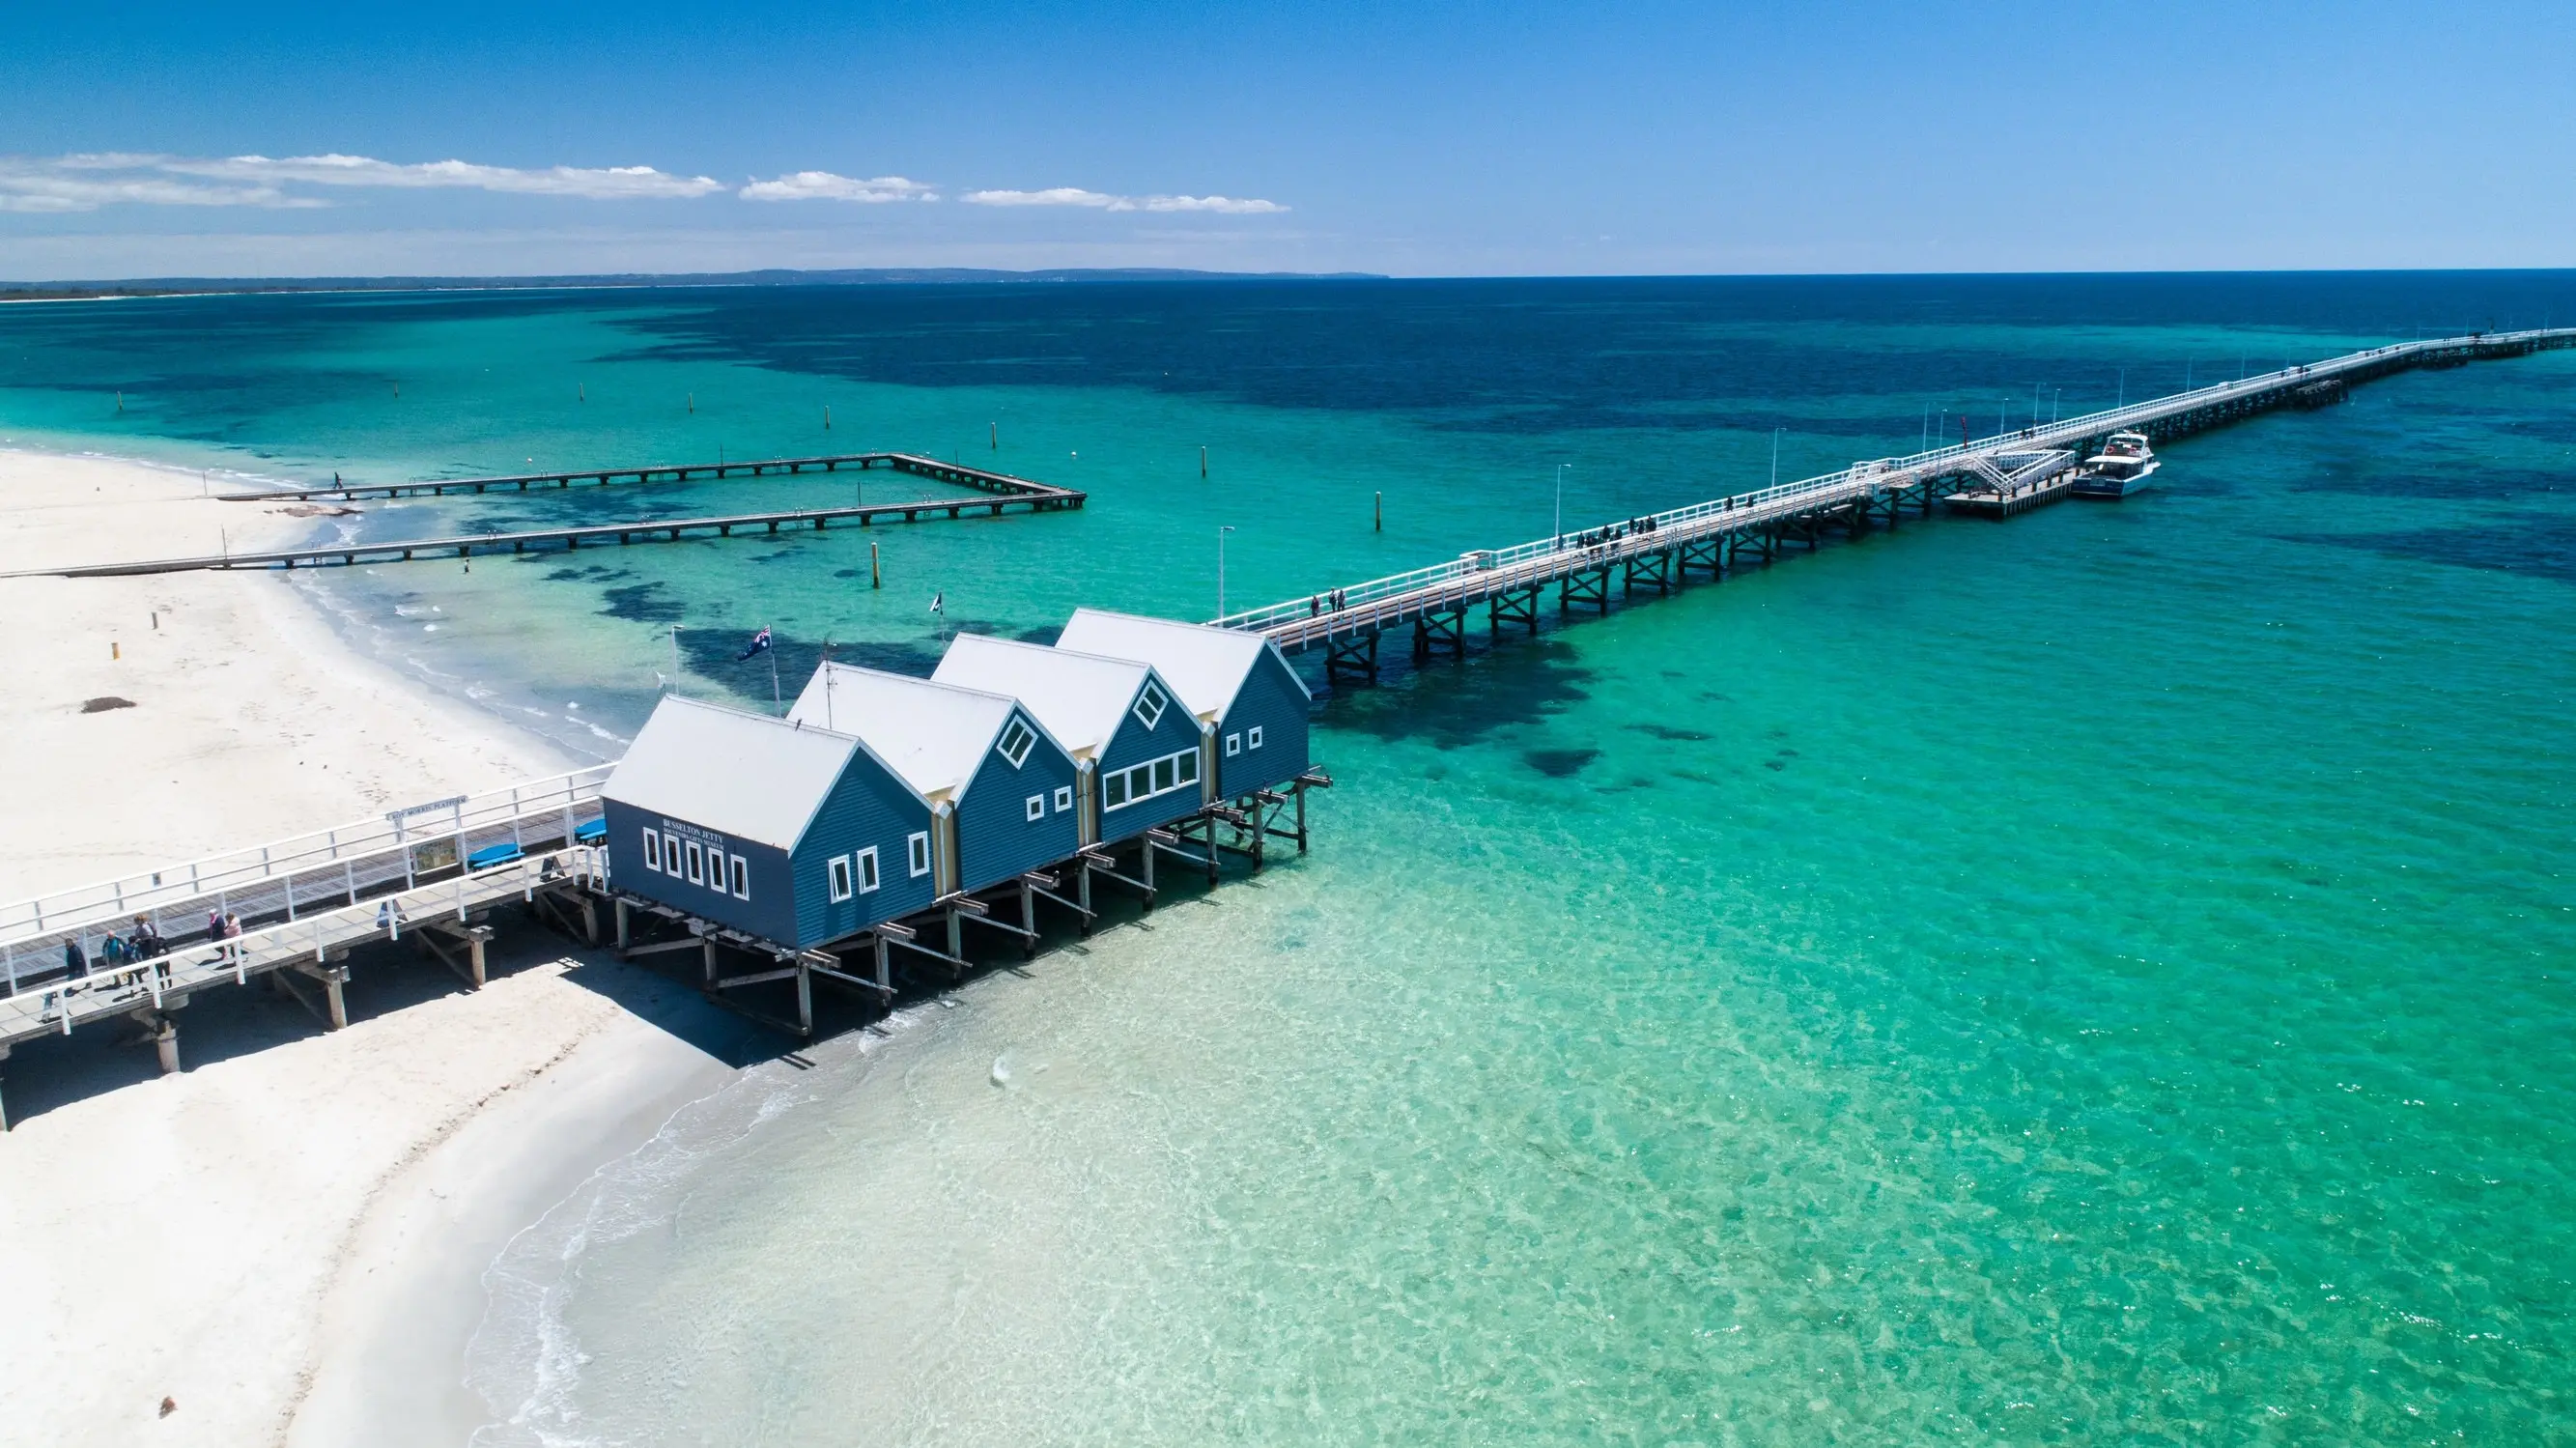 Aerial view of Busselton Jetty. Image credit: Tourism Western Australia